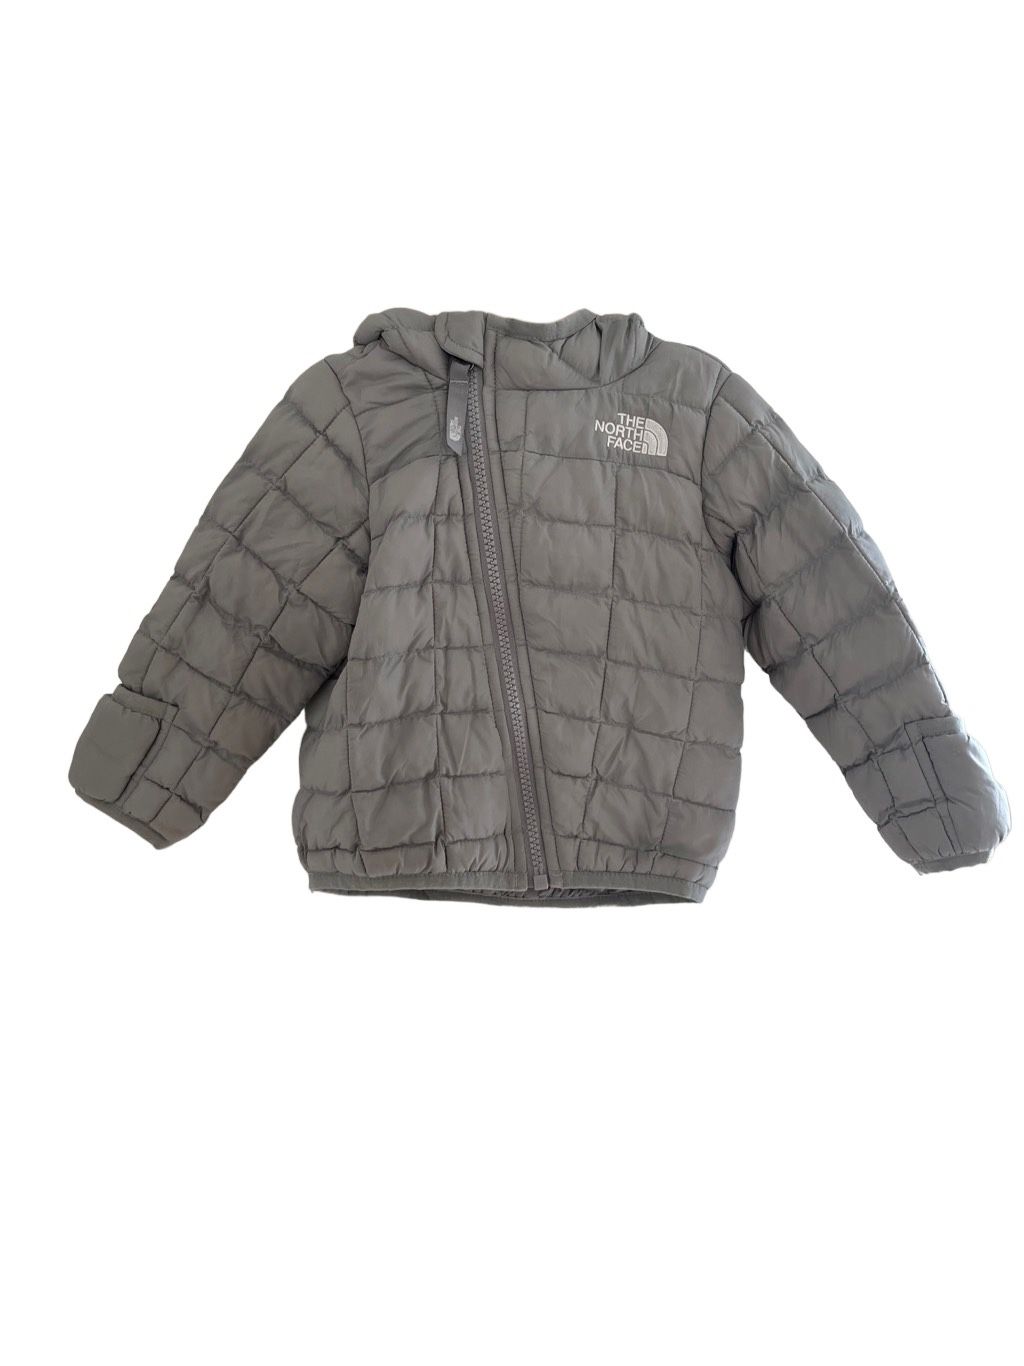 The North Face jacket gray baby boys 6-12 months